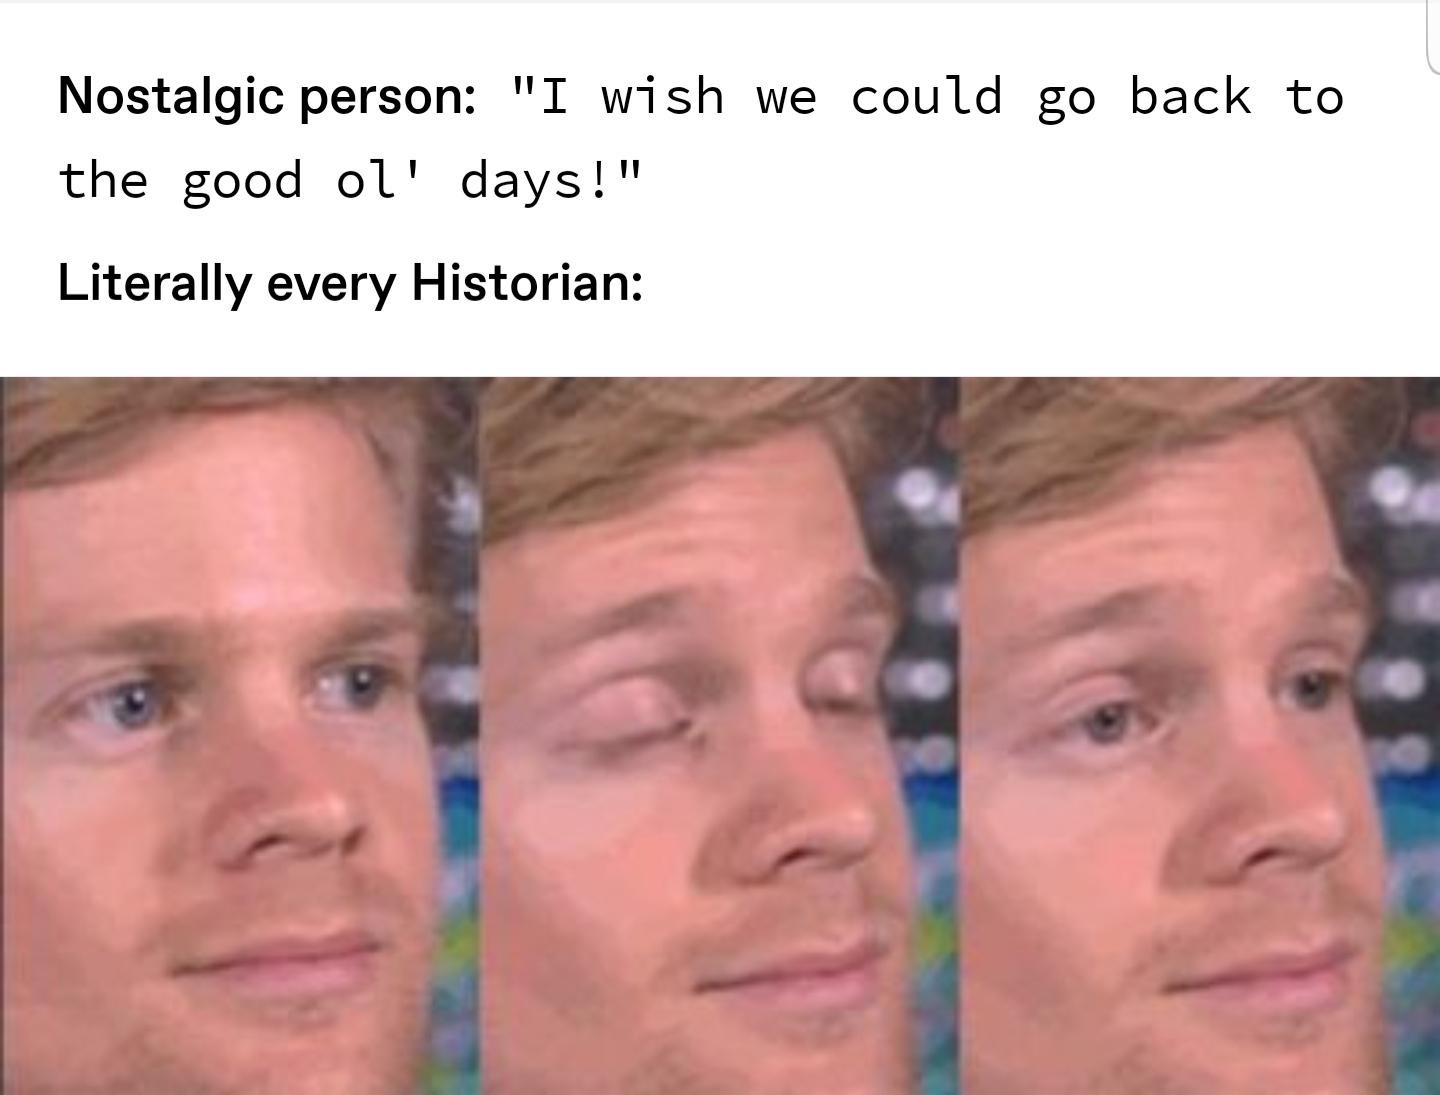 first person to meme - Nostalgic person "I wish we could go back to the good ol' days!" Literally every Historian